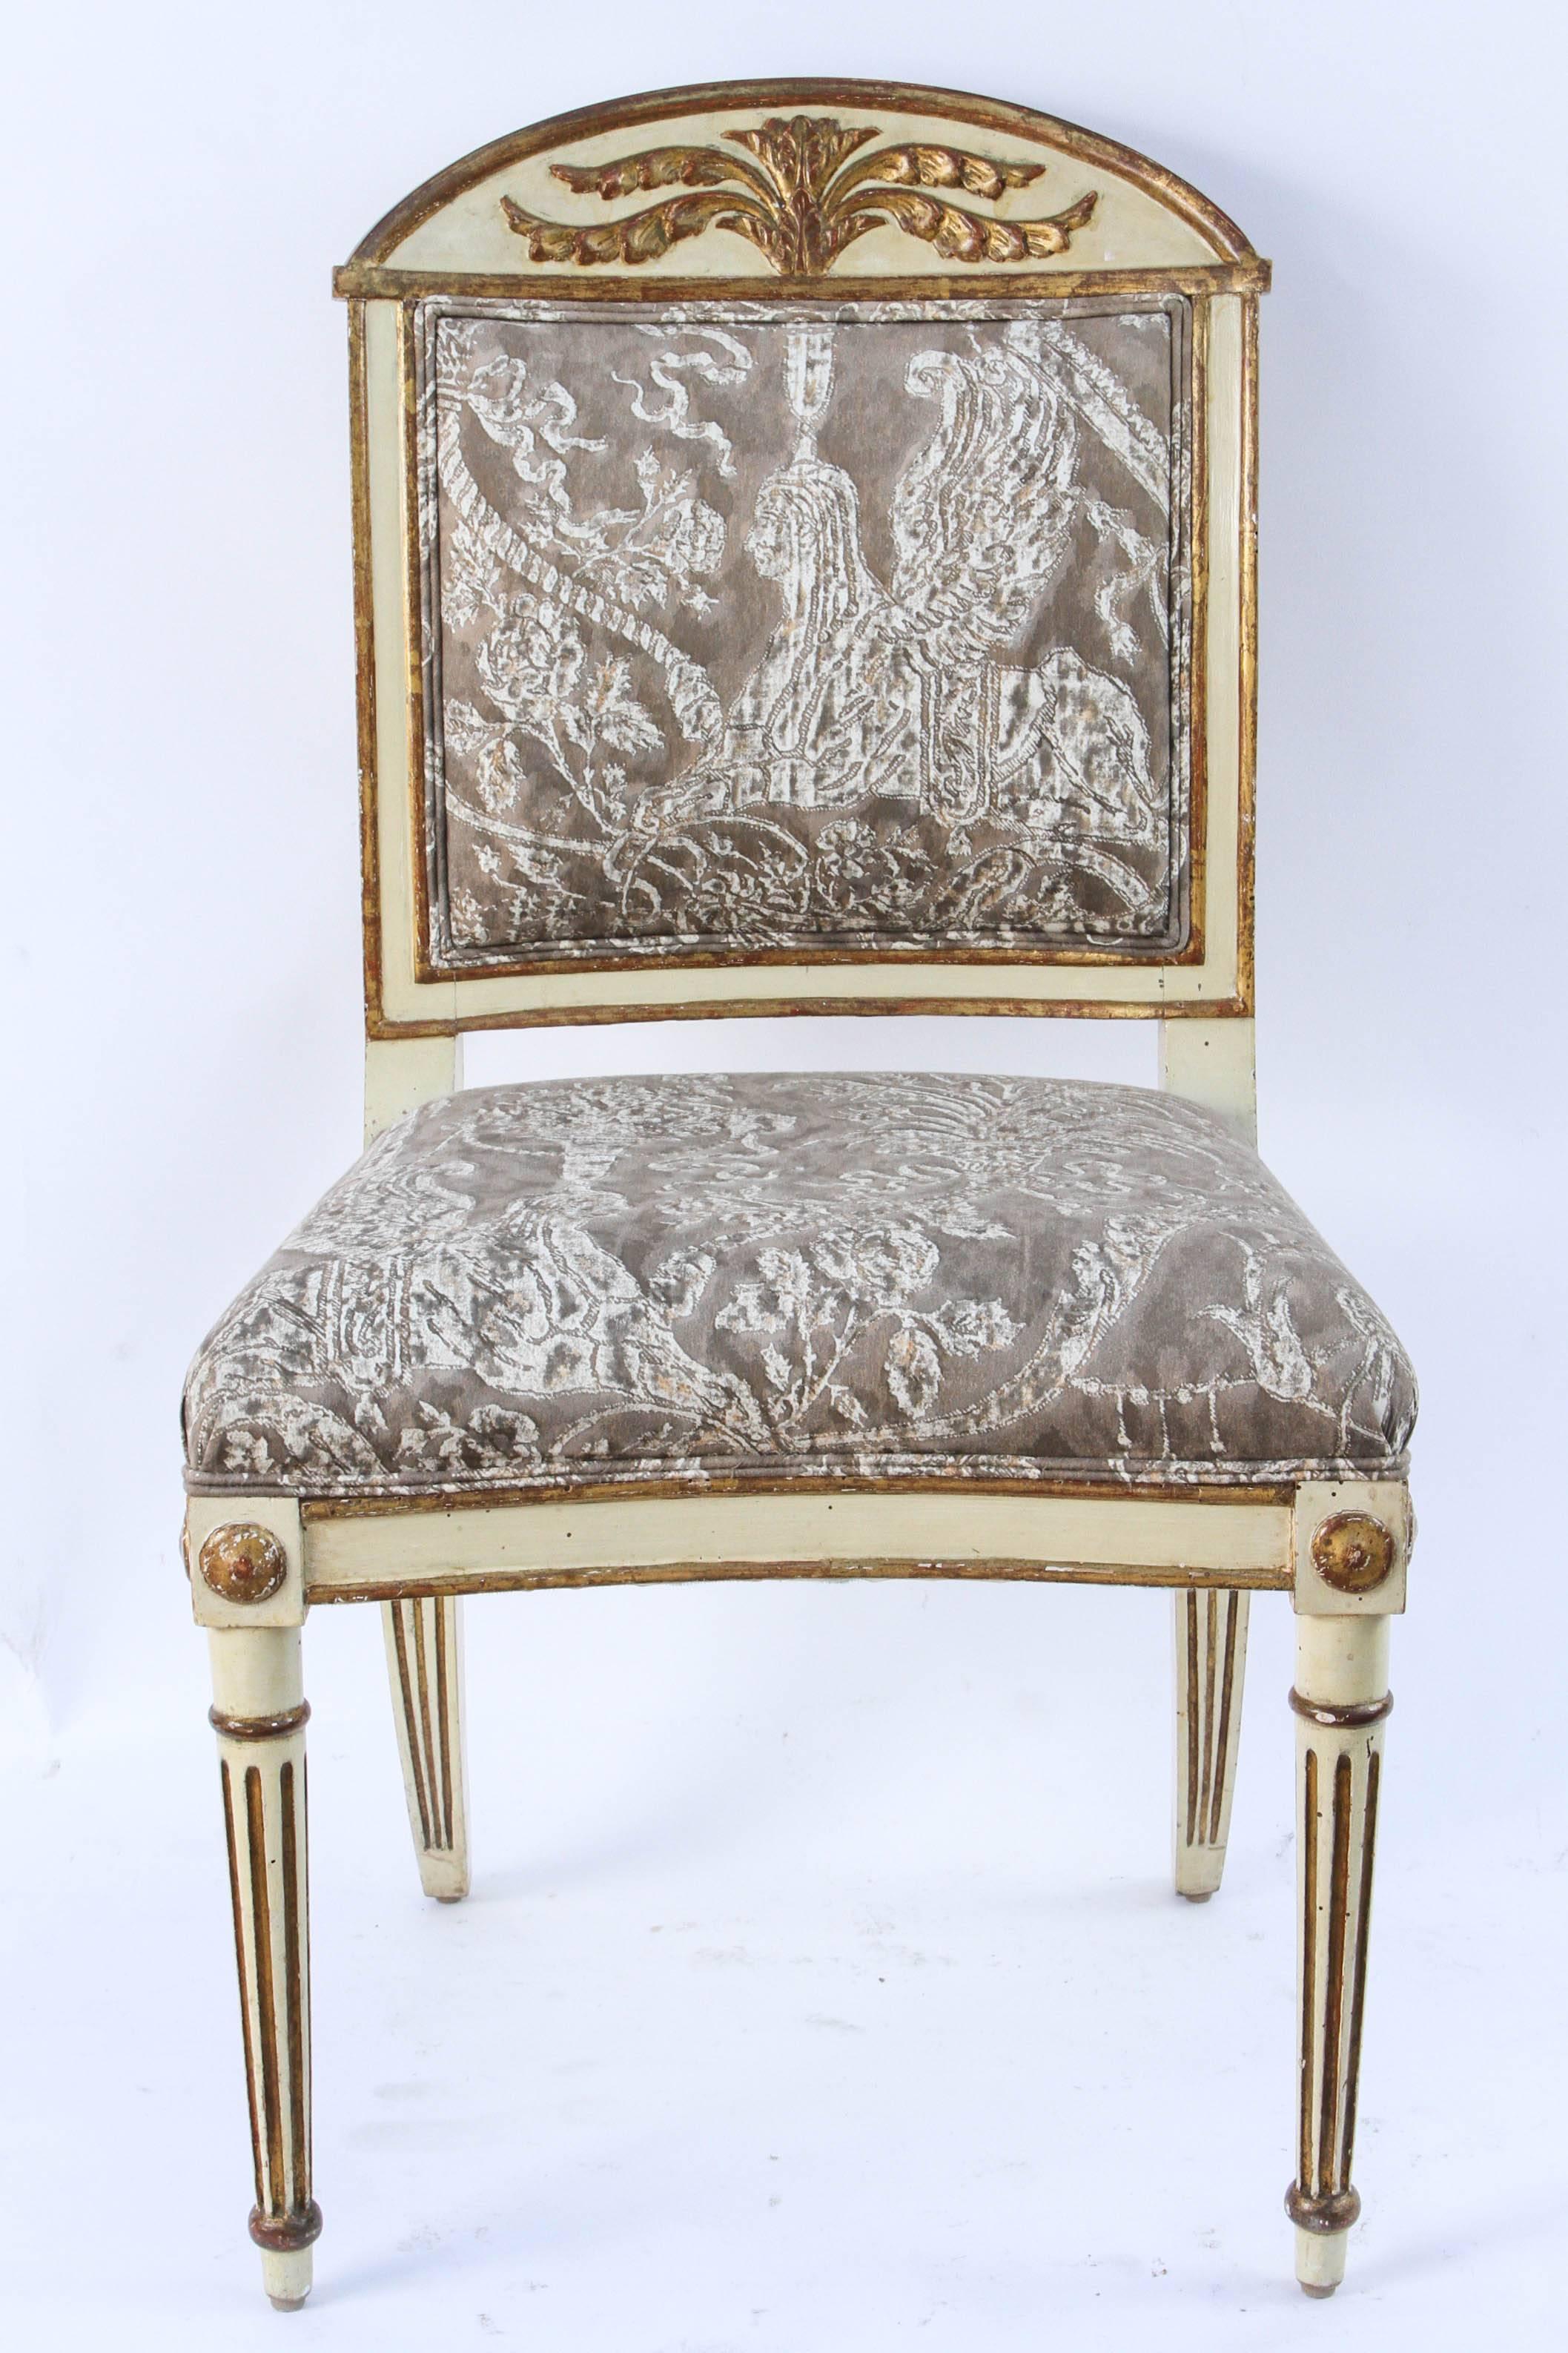 Group of twelve 19th century Italian gilded, carved and painted. Saber dining chairs. Nine are original and three are reproductions.